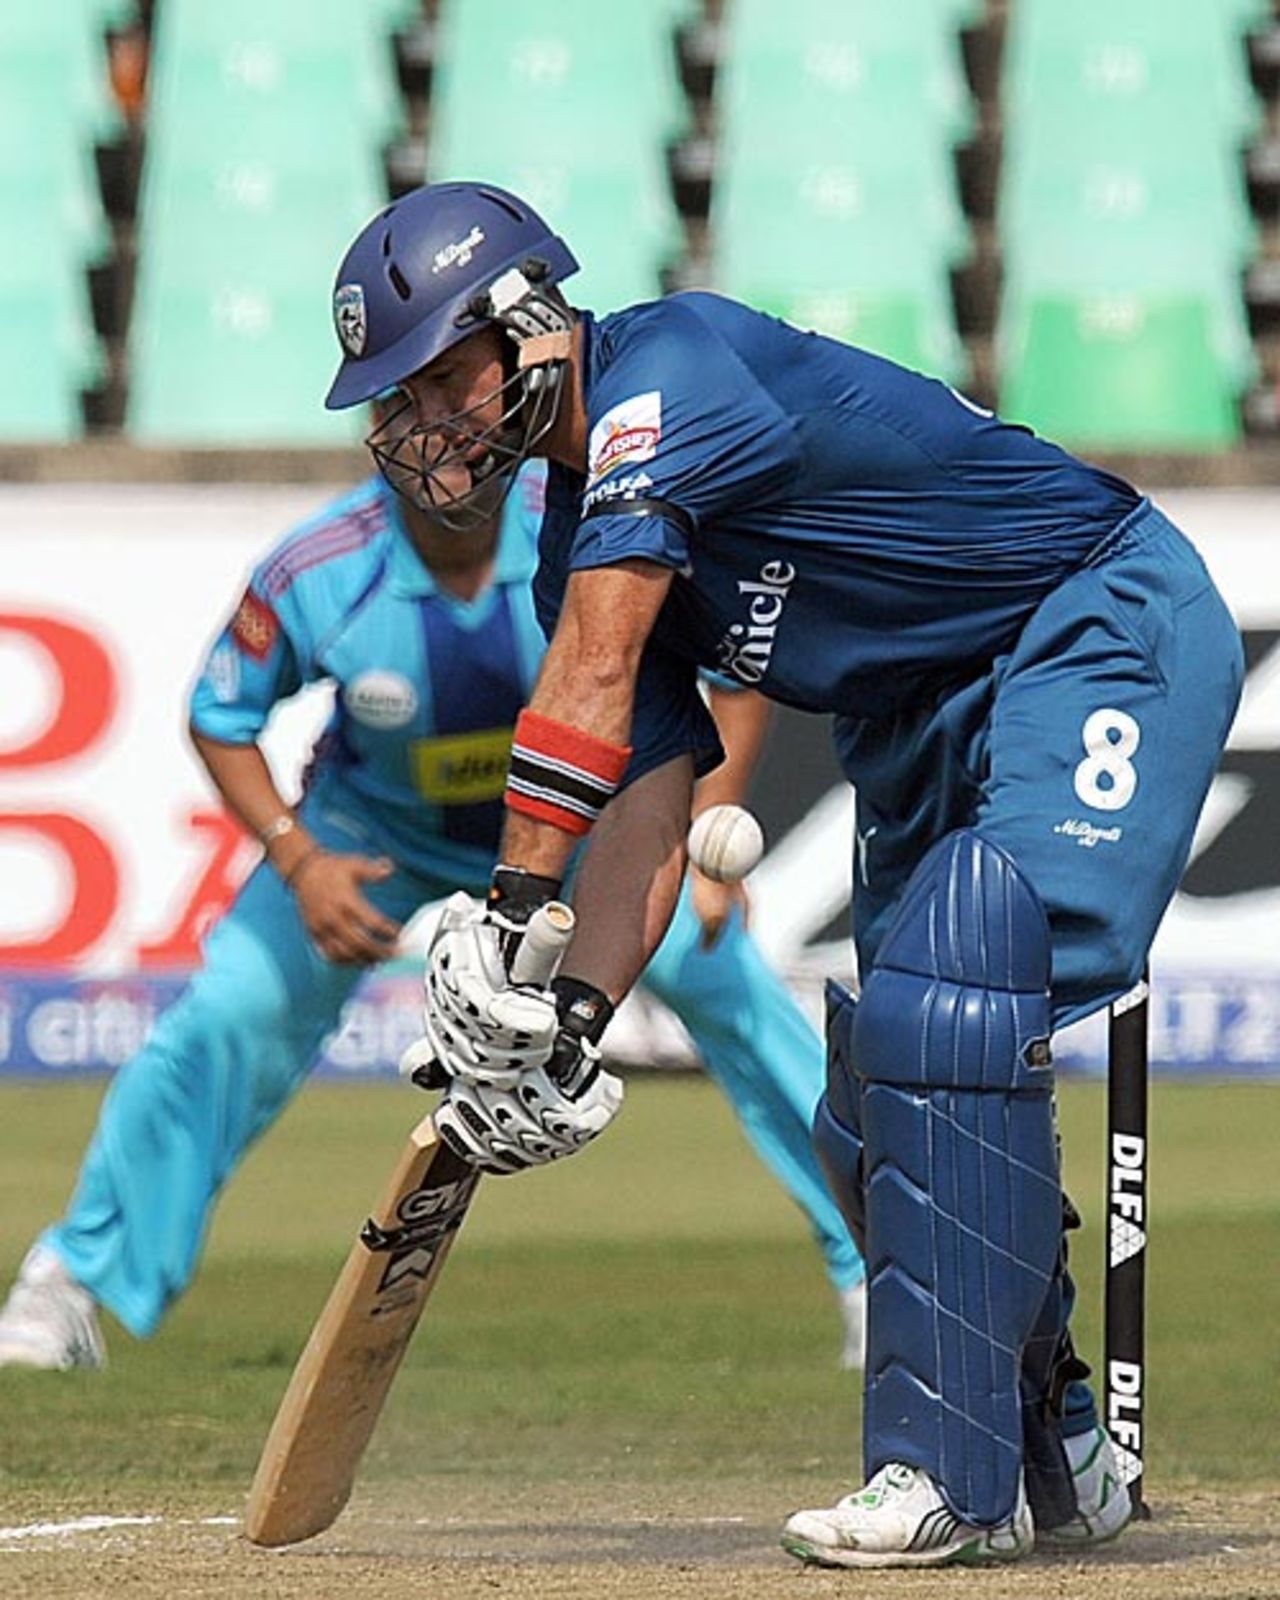 Herschelle Gibbs digs out a yorker, Deccan Chargers v Mumbai Indians, IPL, 12th Match, Durban, April 25, 2009